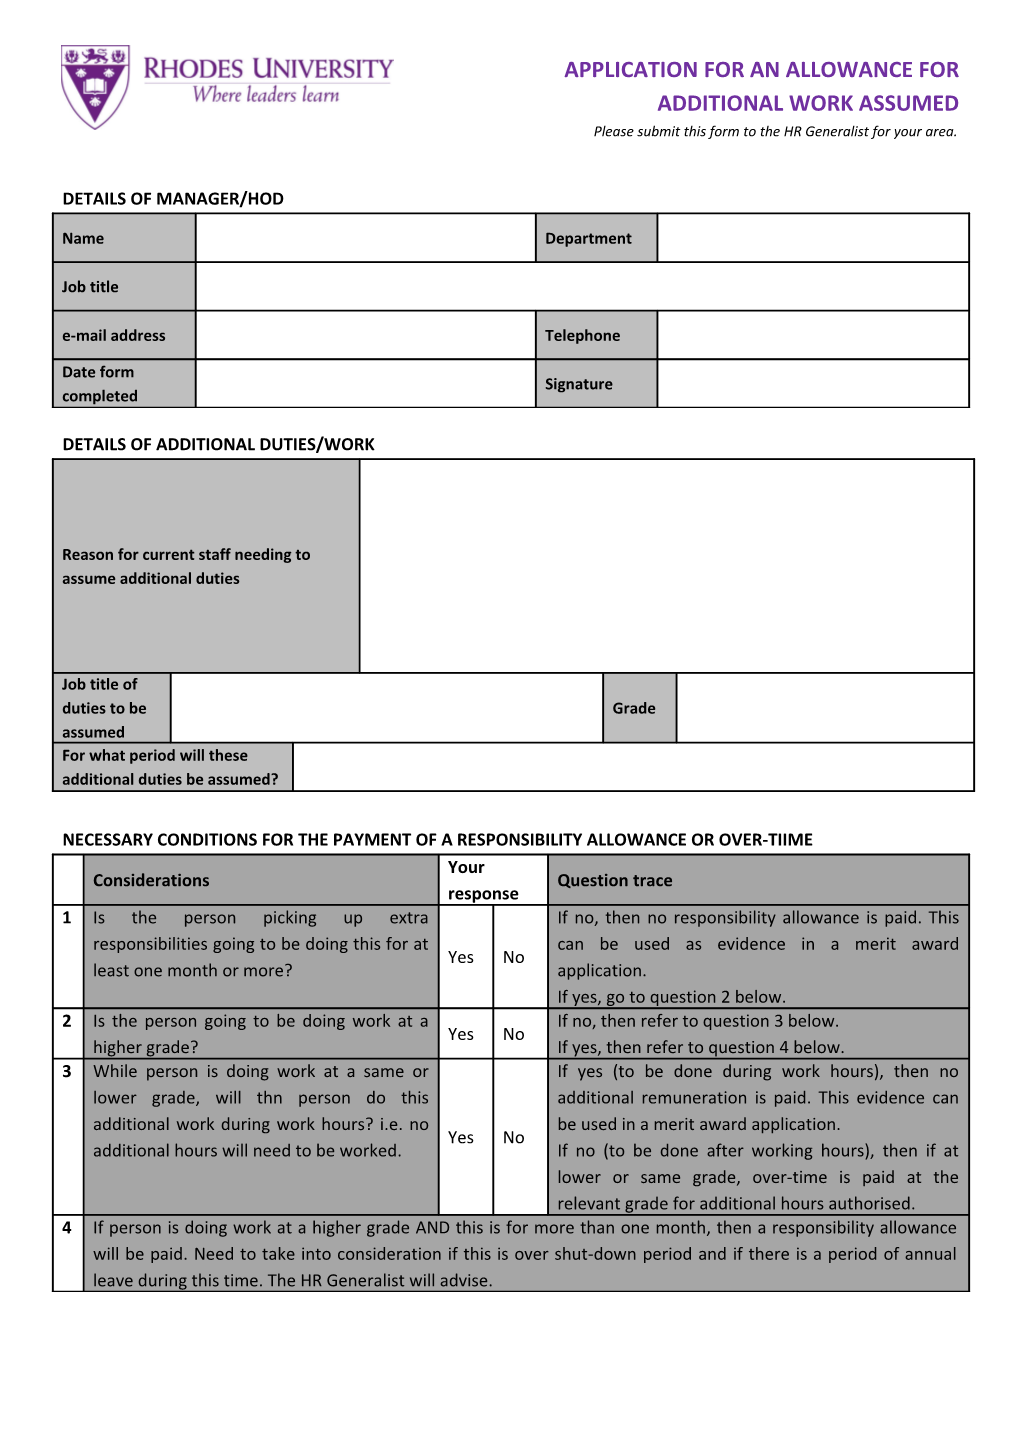 Please Submit This Form to the HR Generalist for Your Area